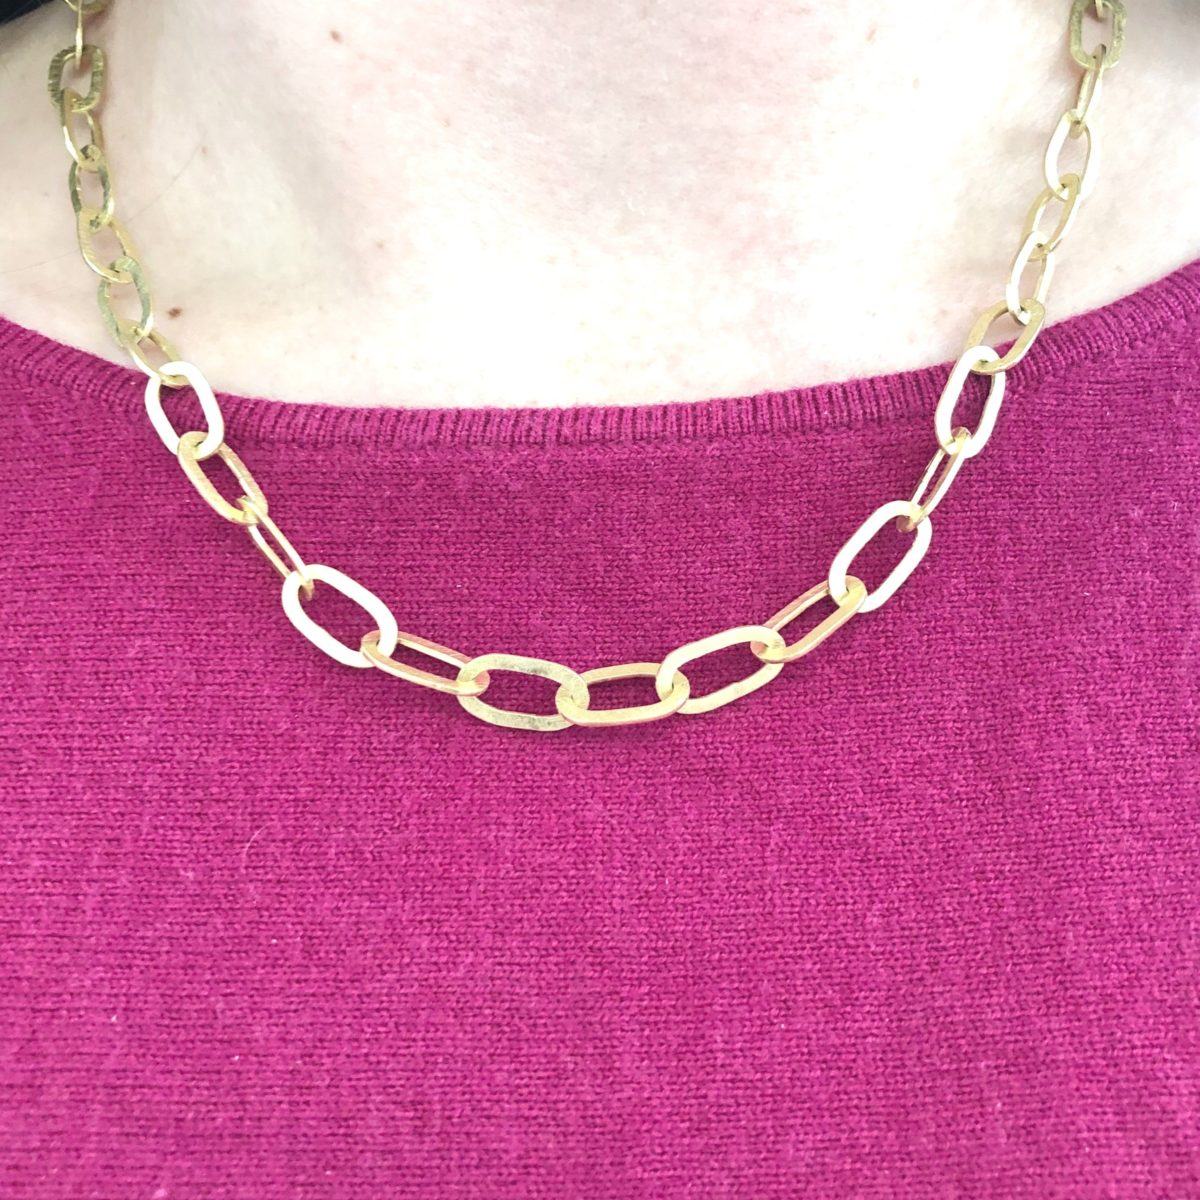 Rolled Oval Yellow Gold Necklace